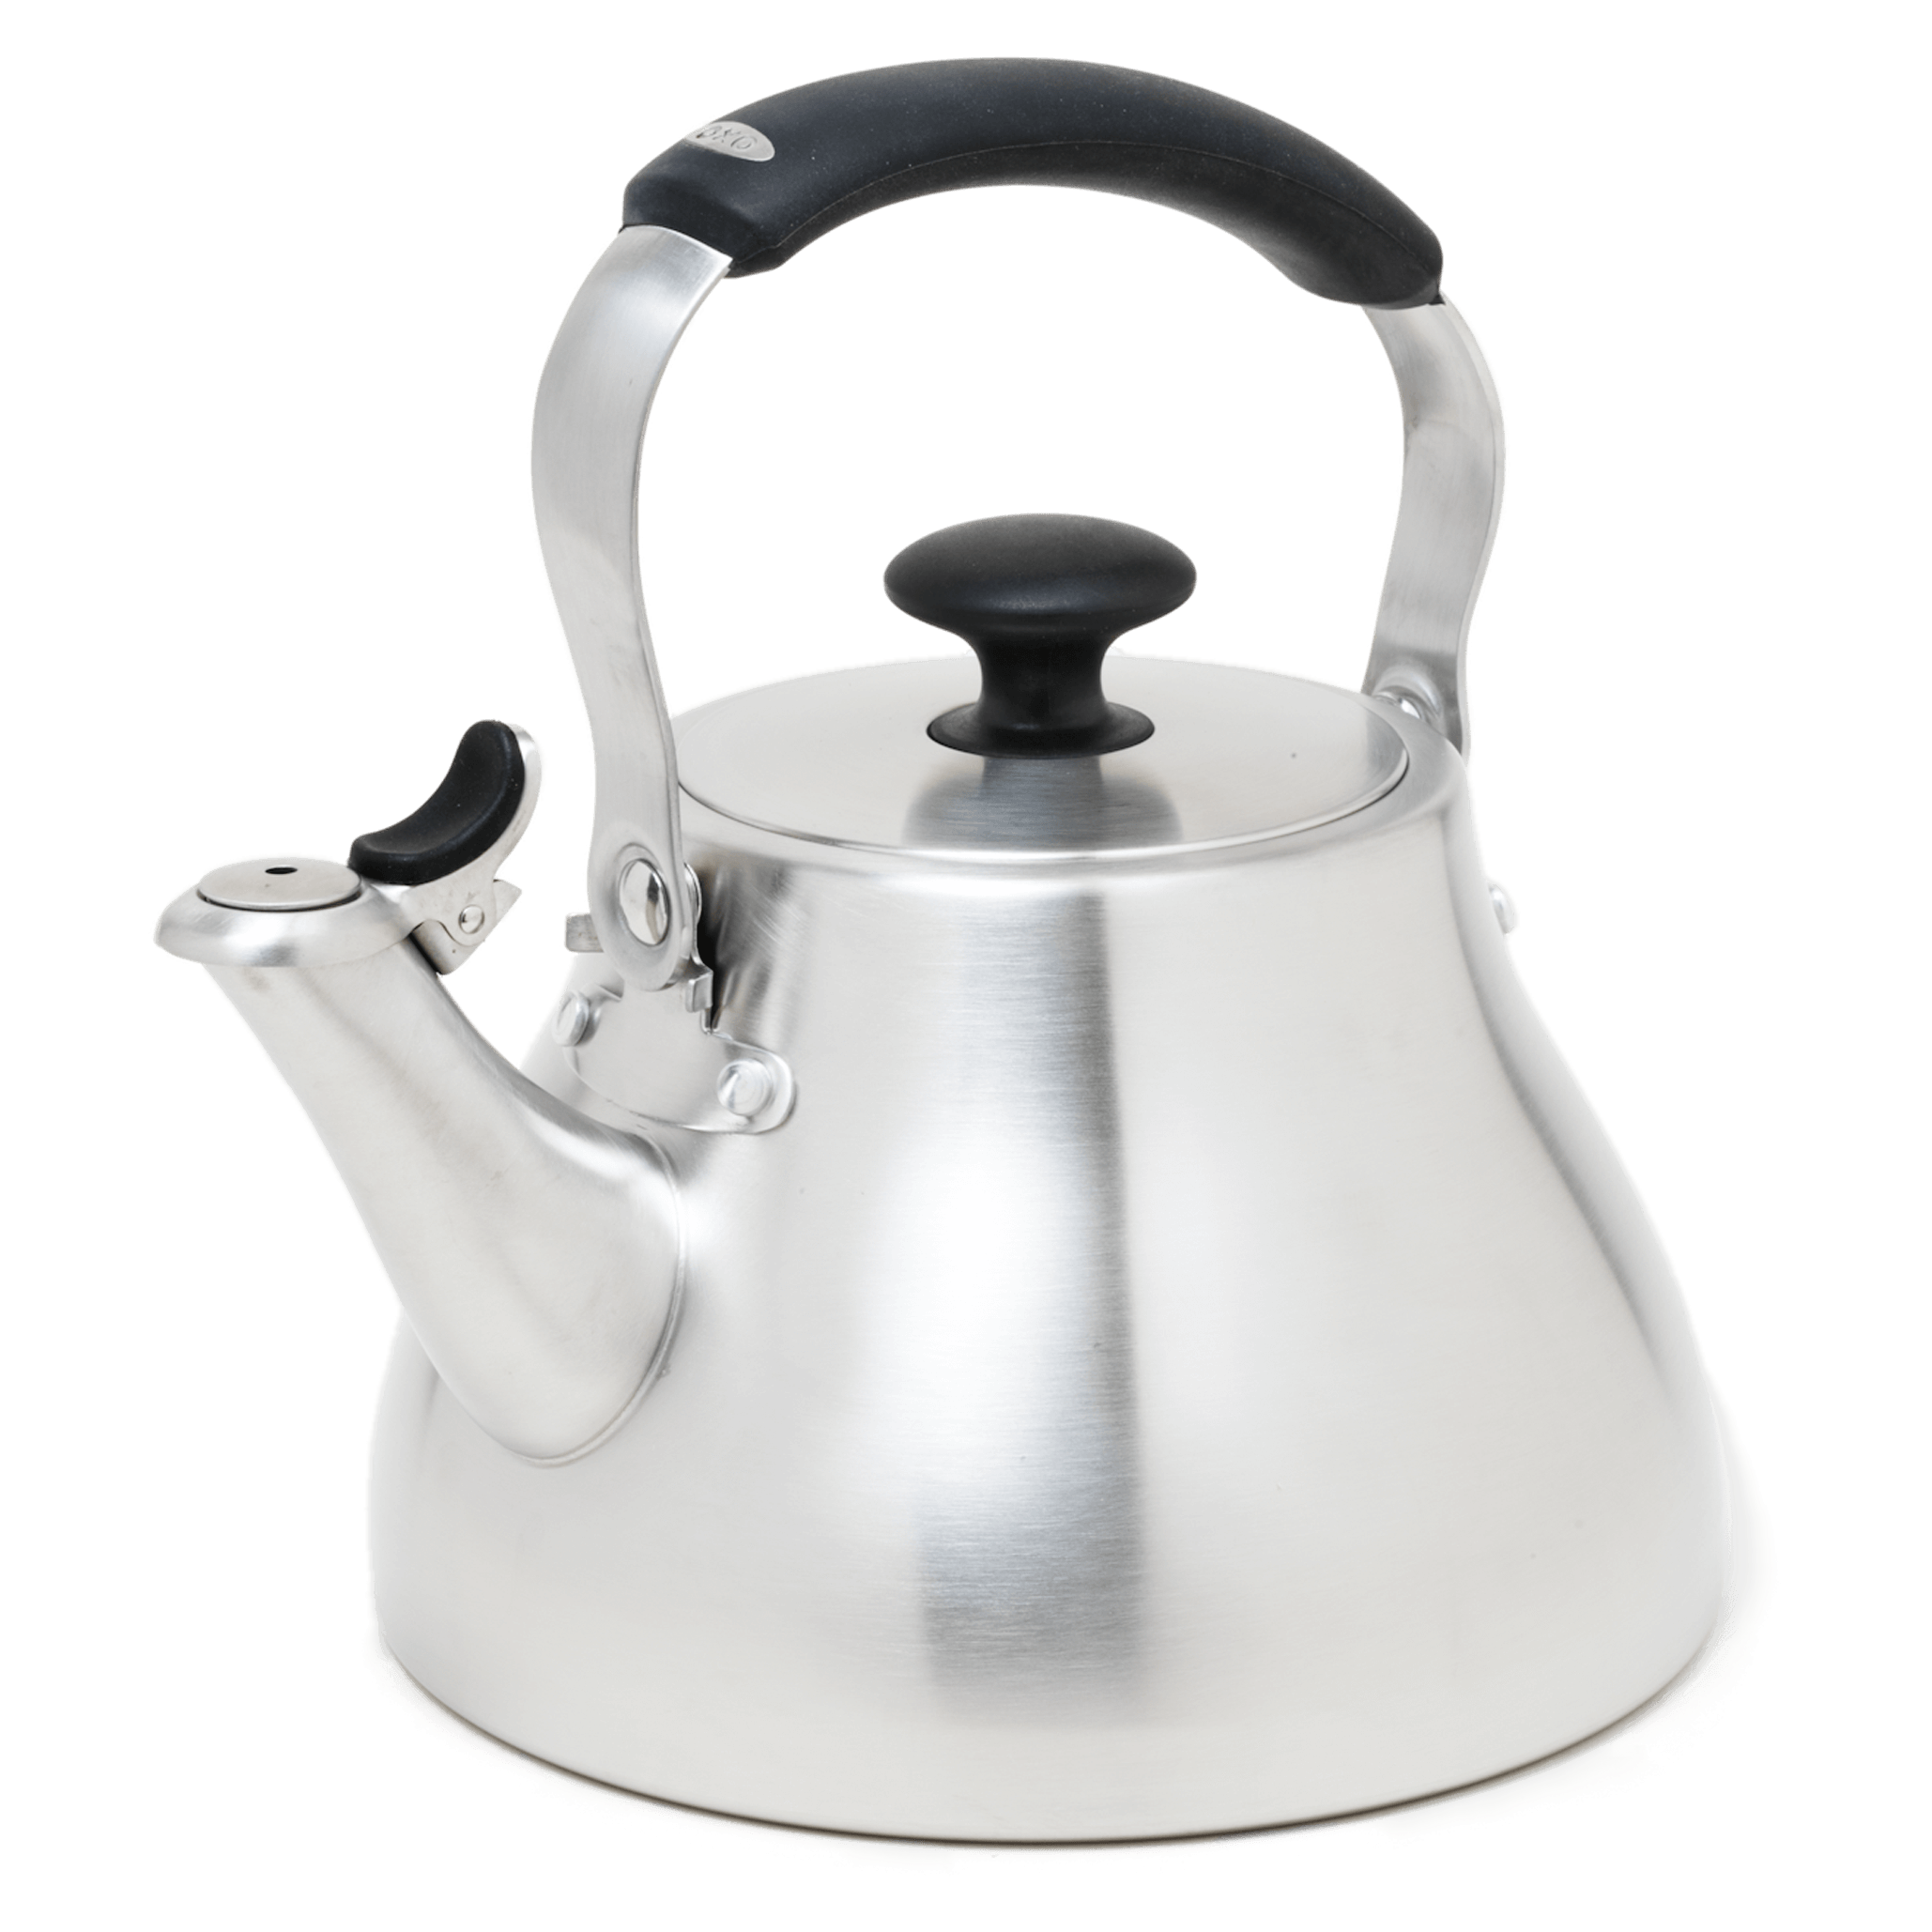 top of the range kettles